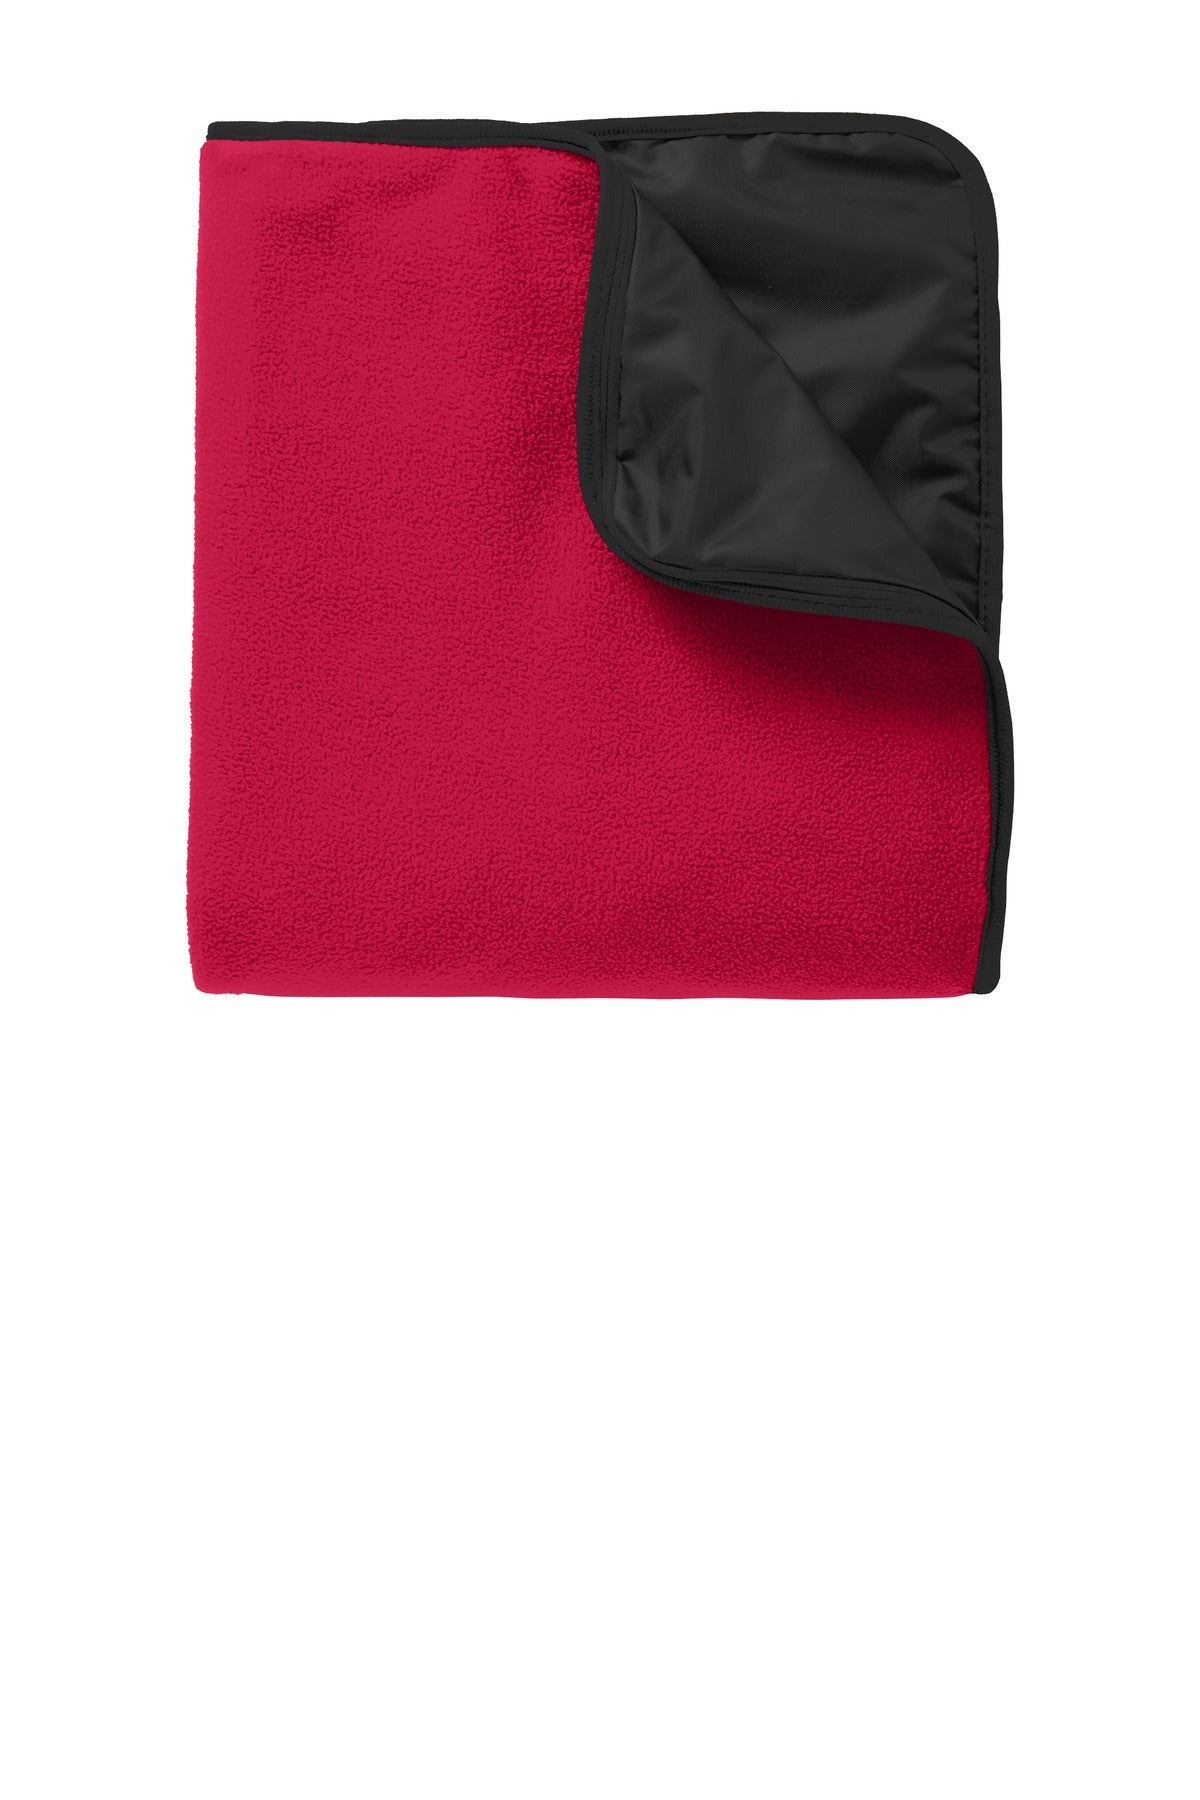 Accessories Rich Red/ Black OSFA Port Authority